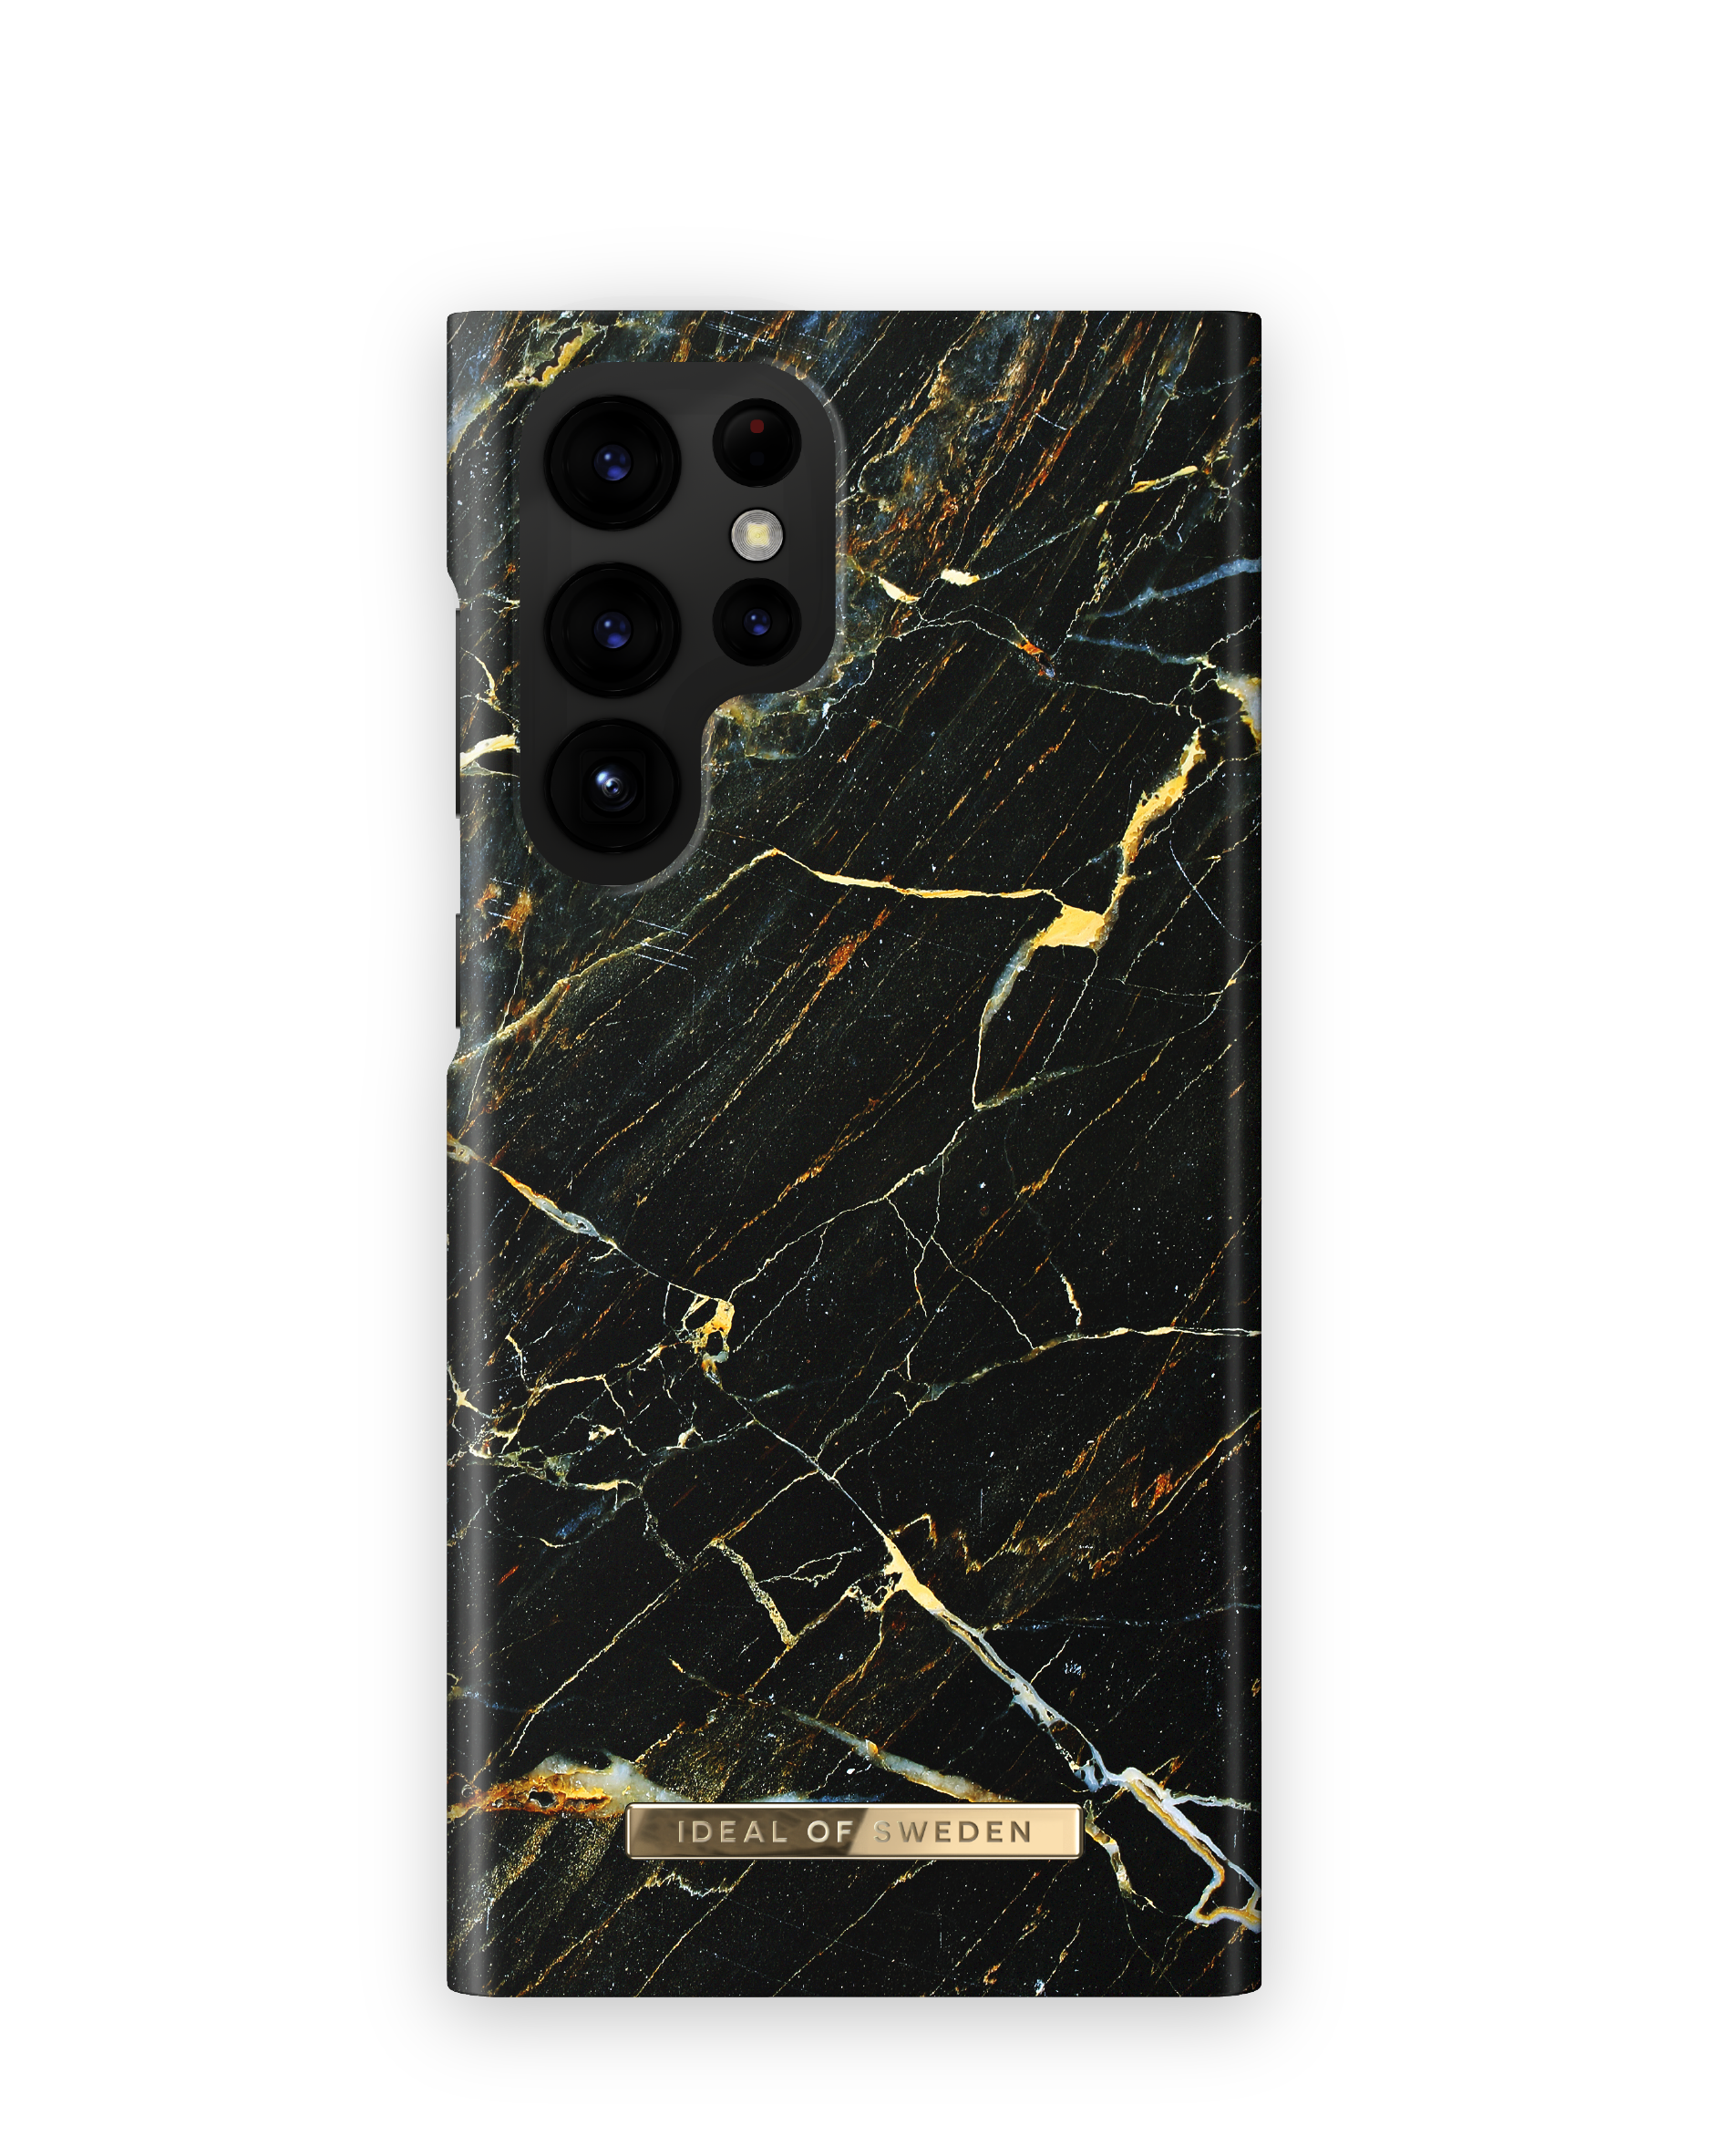 Backcover, Port SWEDEN Samsung, Laurent IDFCAW16-S22U-49, OF IDEAL Marble S22 Ultra, Galaxy